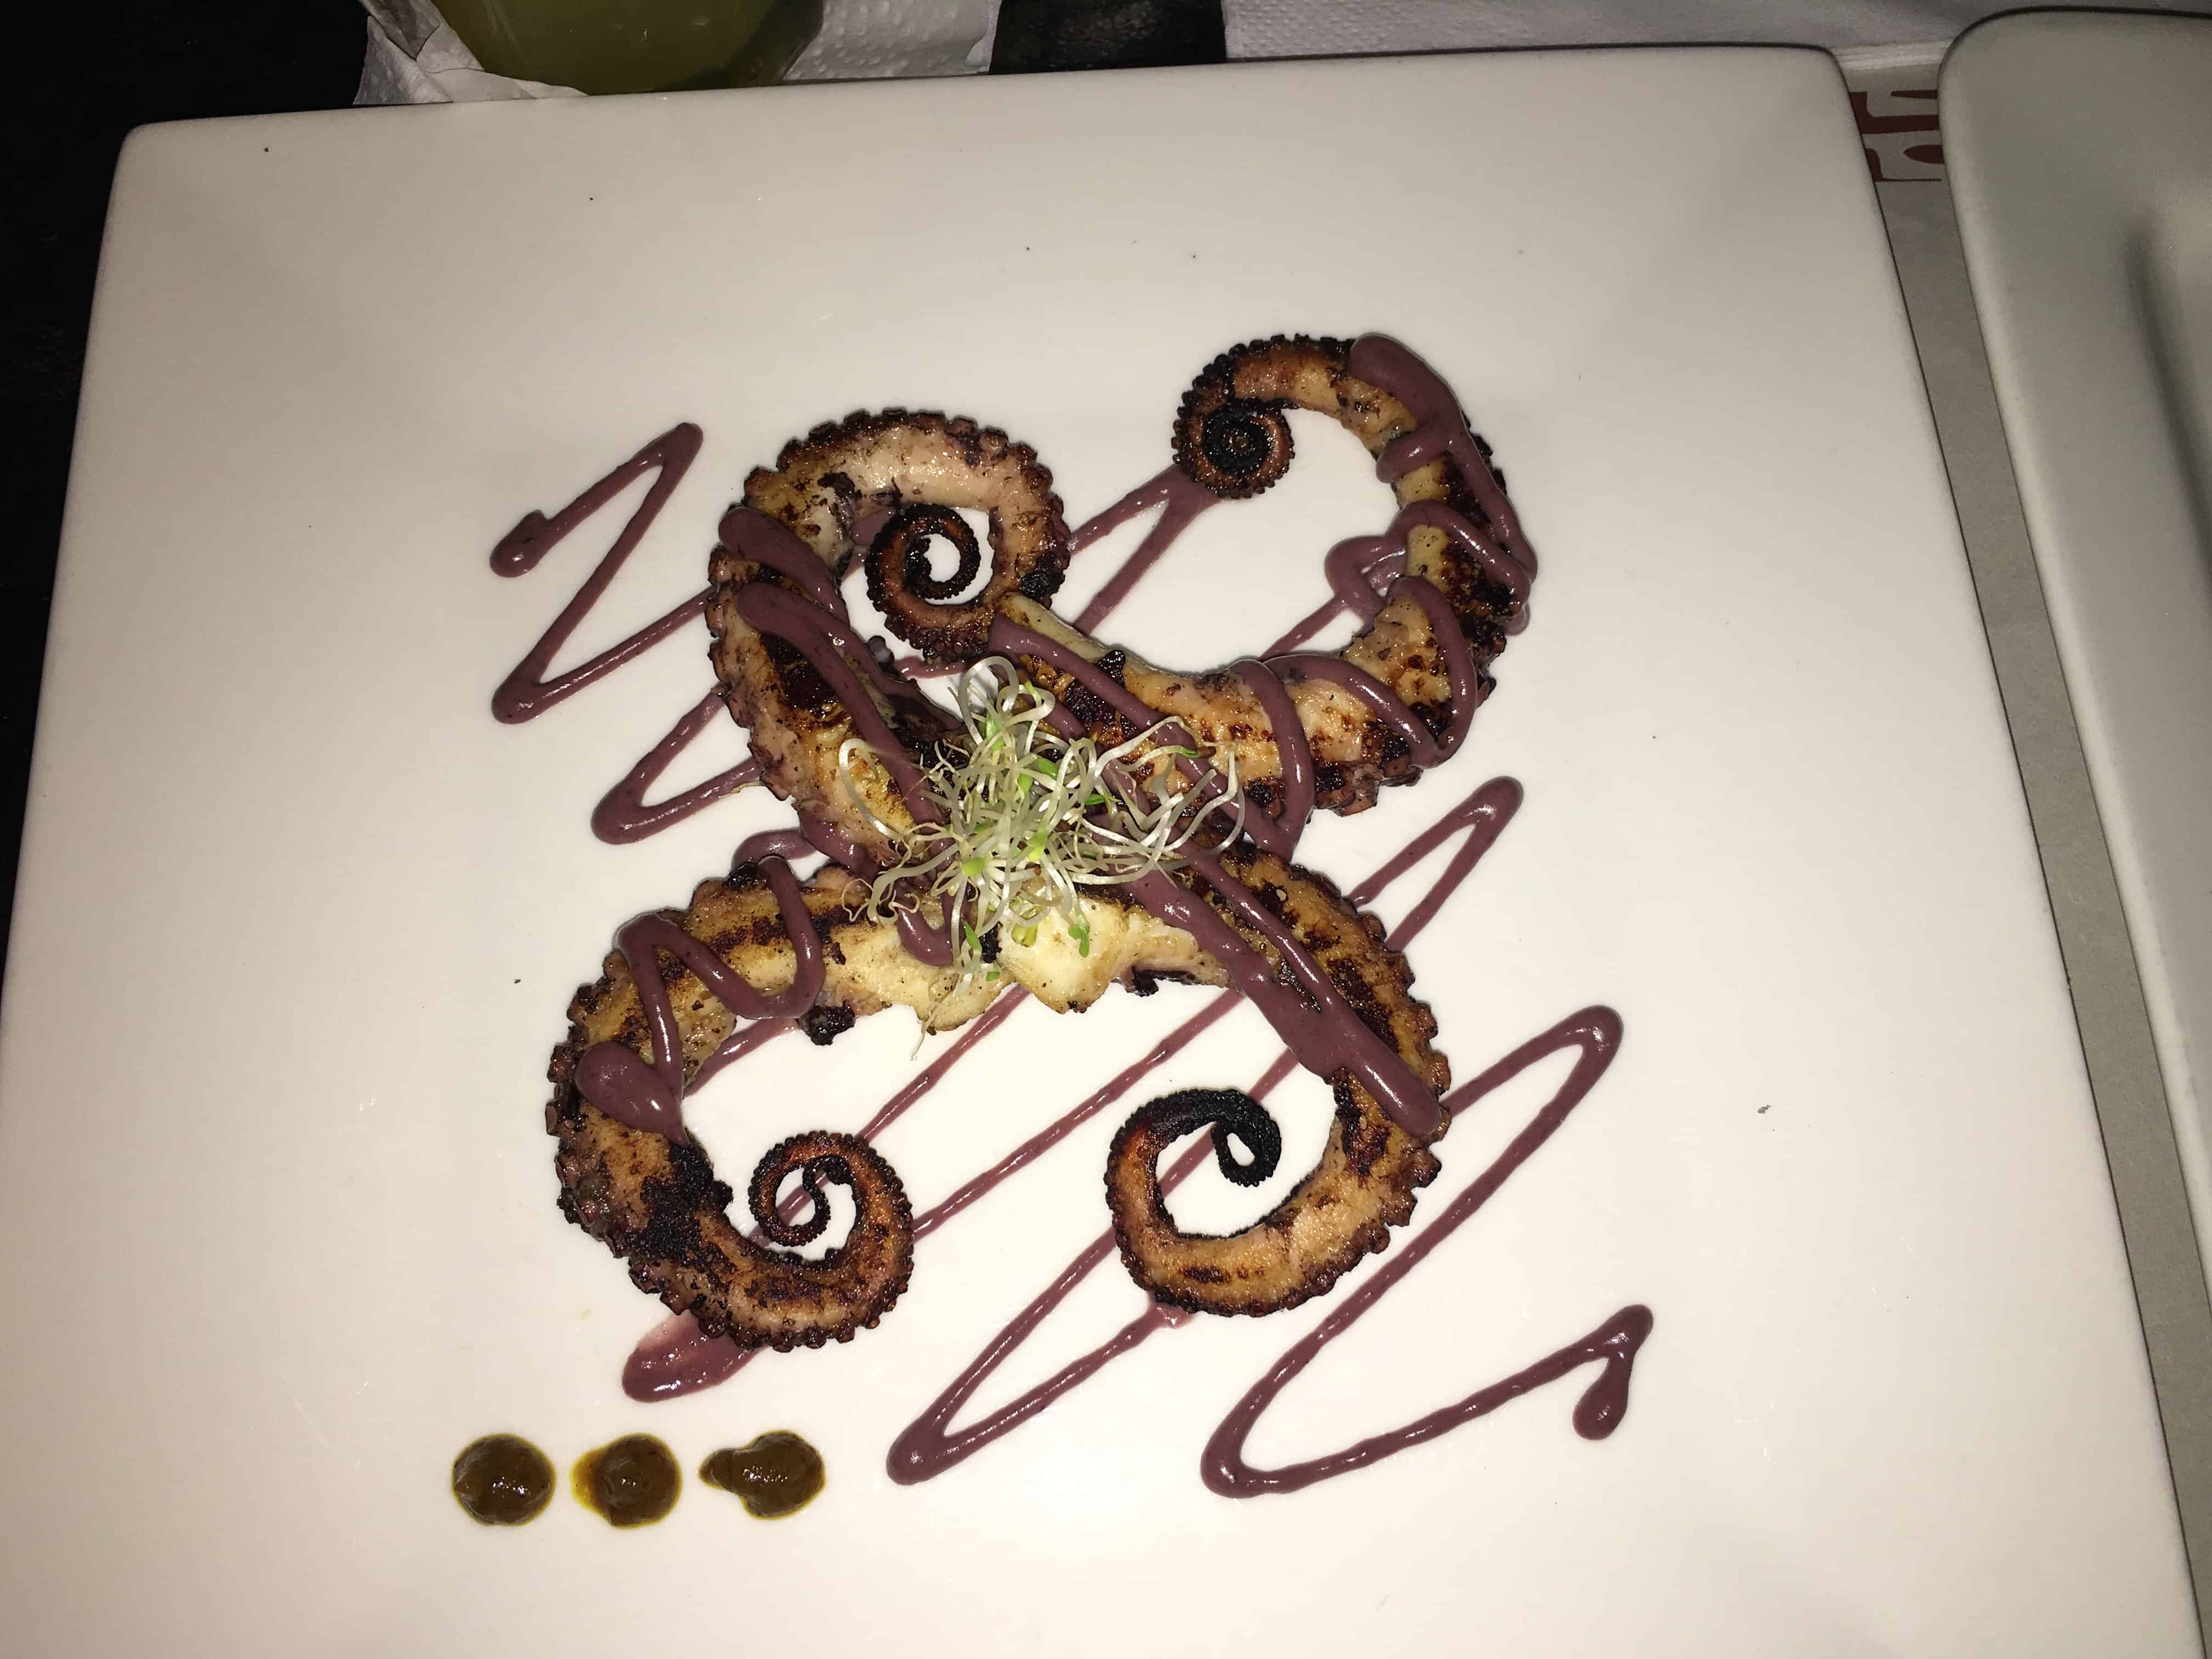 Grilled octopus at Terra Inca in Popayán, Cauca, Colombia